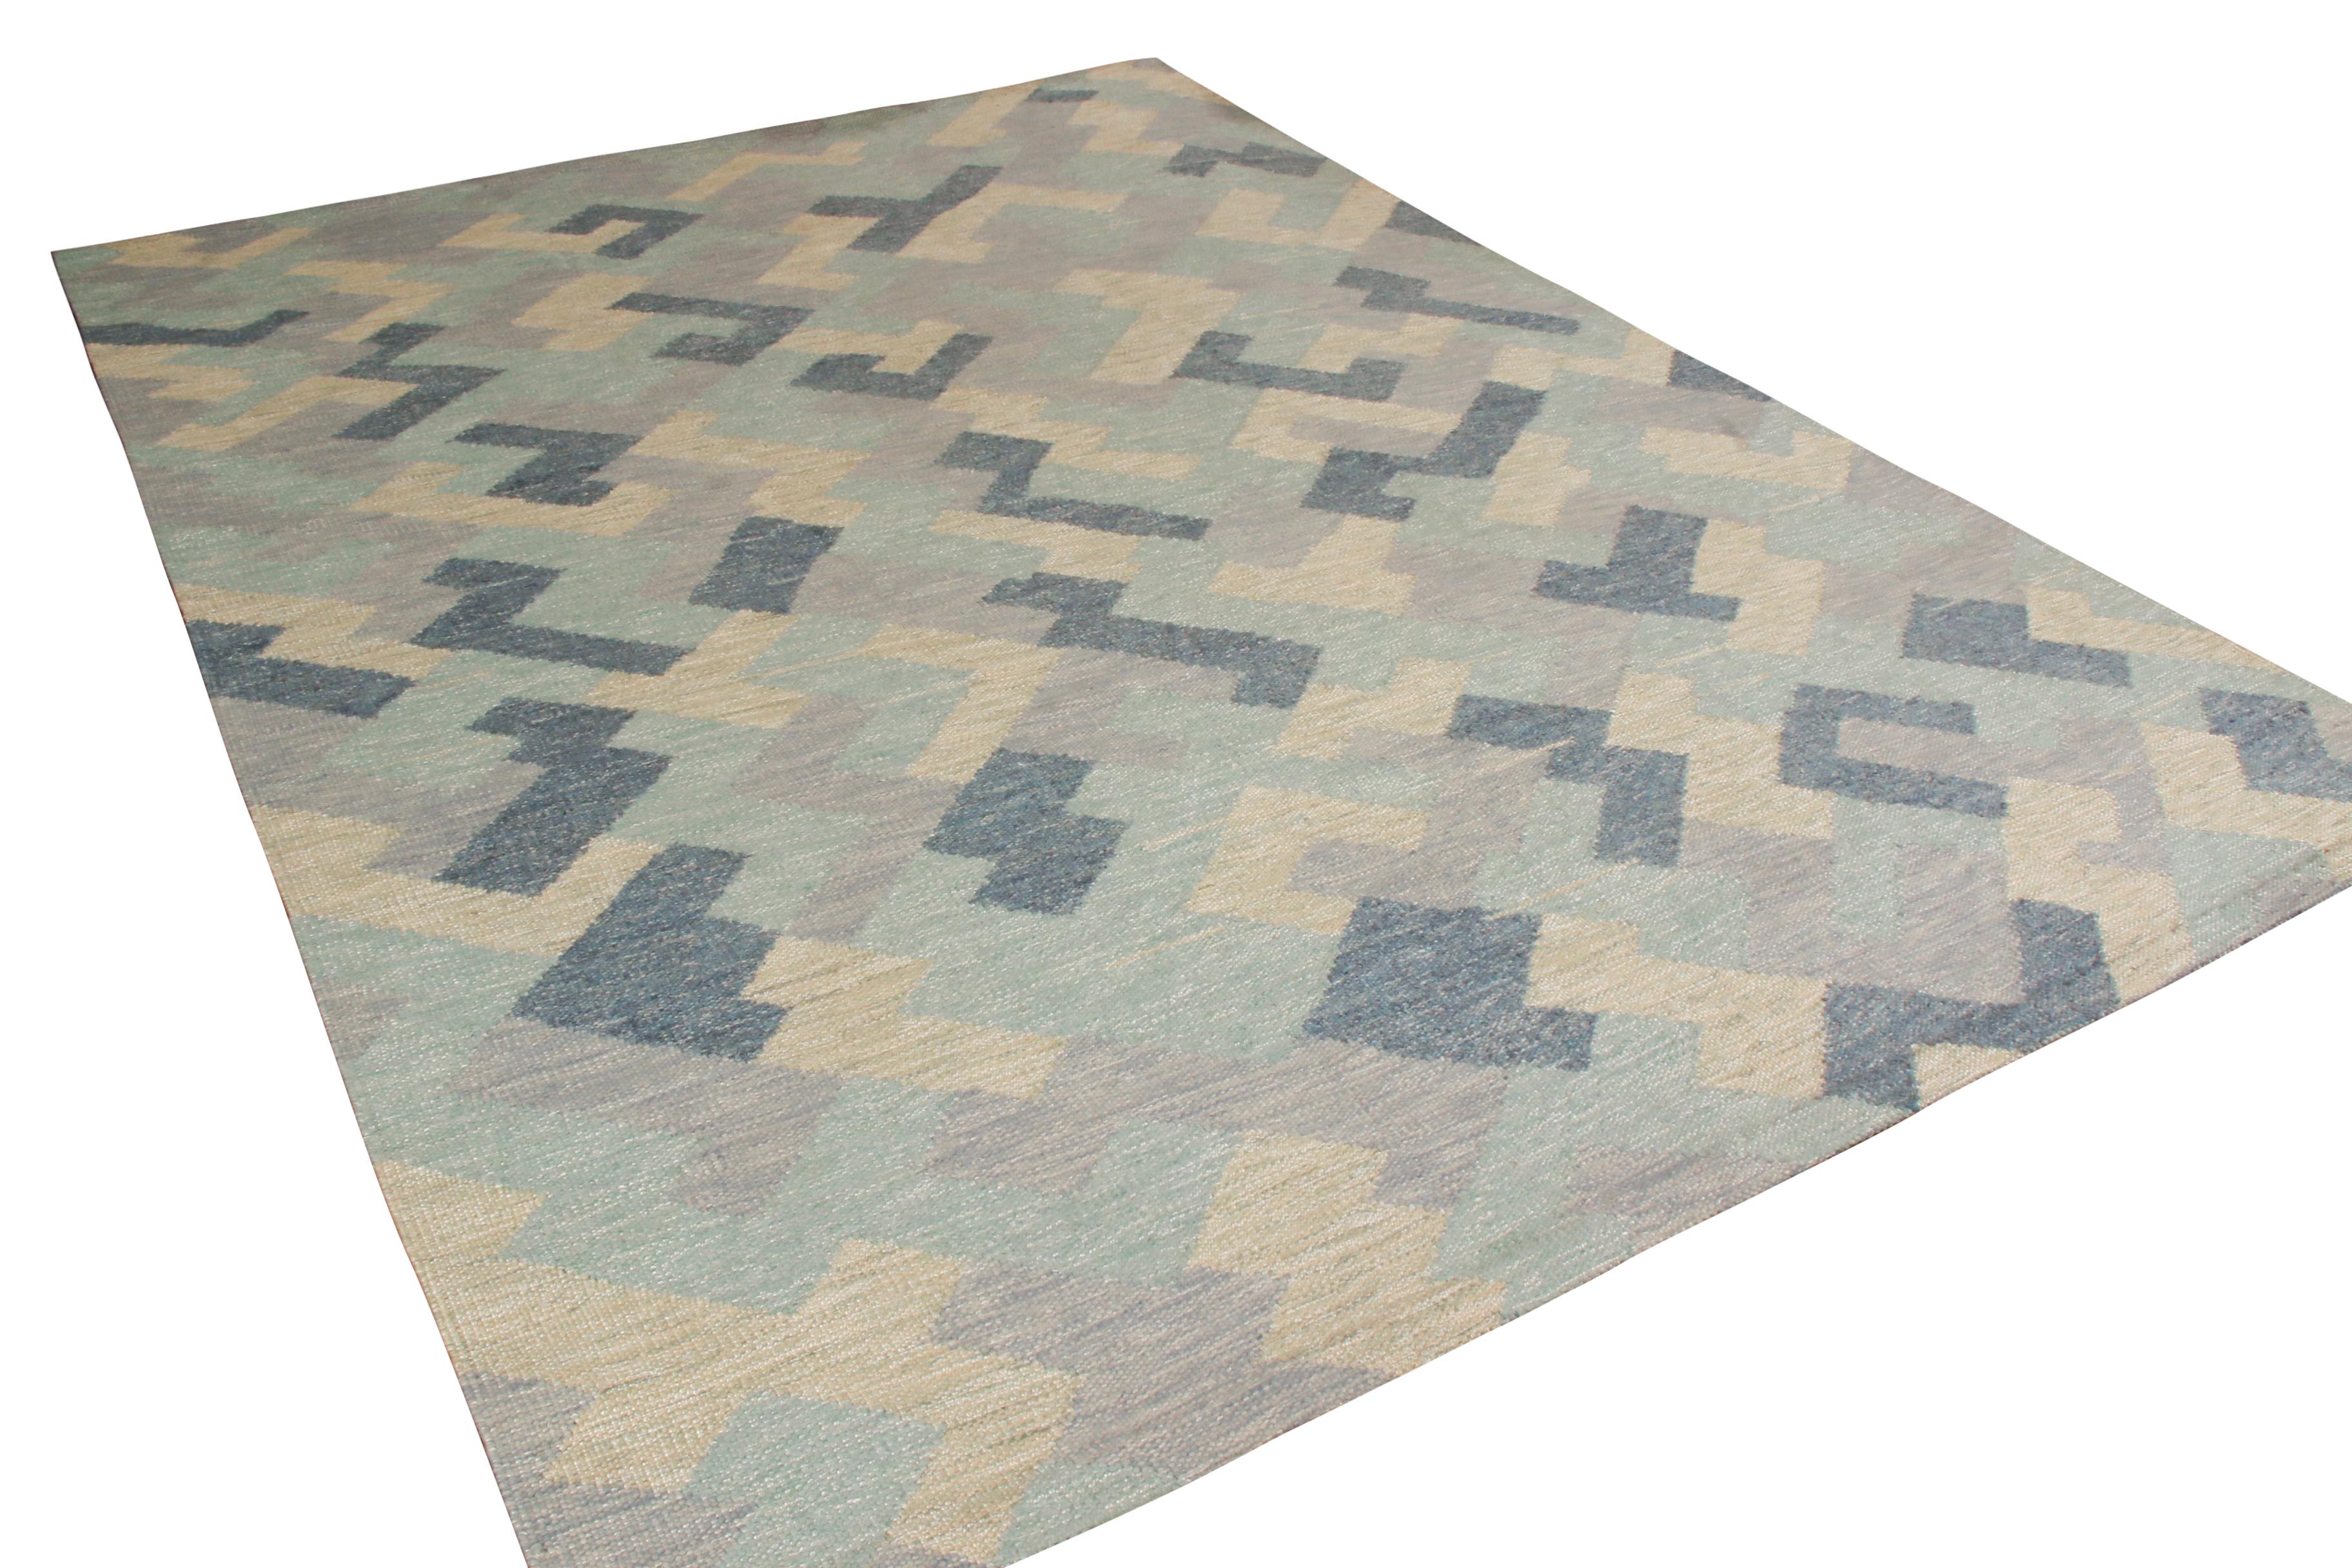 handwoven in a proprietary blend of wool and silk, this flat-weave is an 9x12 Scandinavian Kilim rug from Rug & Kilim’s award-winning Scandinavian Collection, enjoying a transitional, modern appeal in the marriage of a geometric all-over pattern